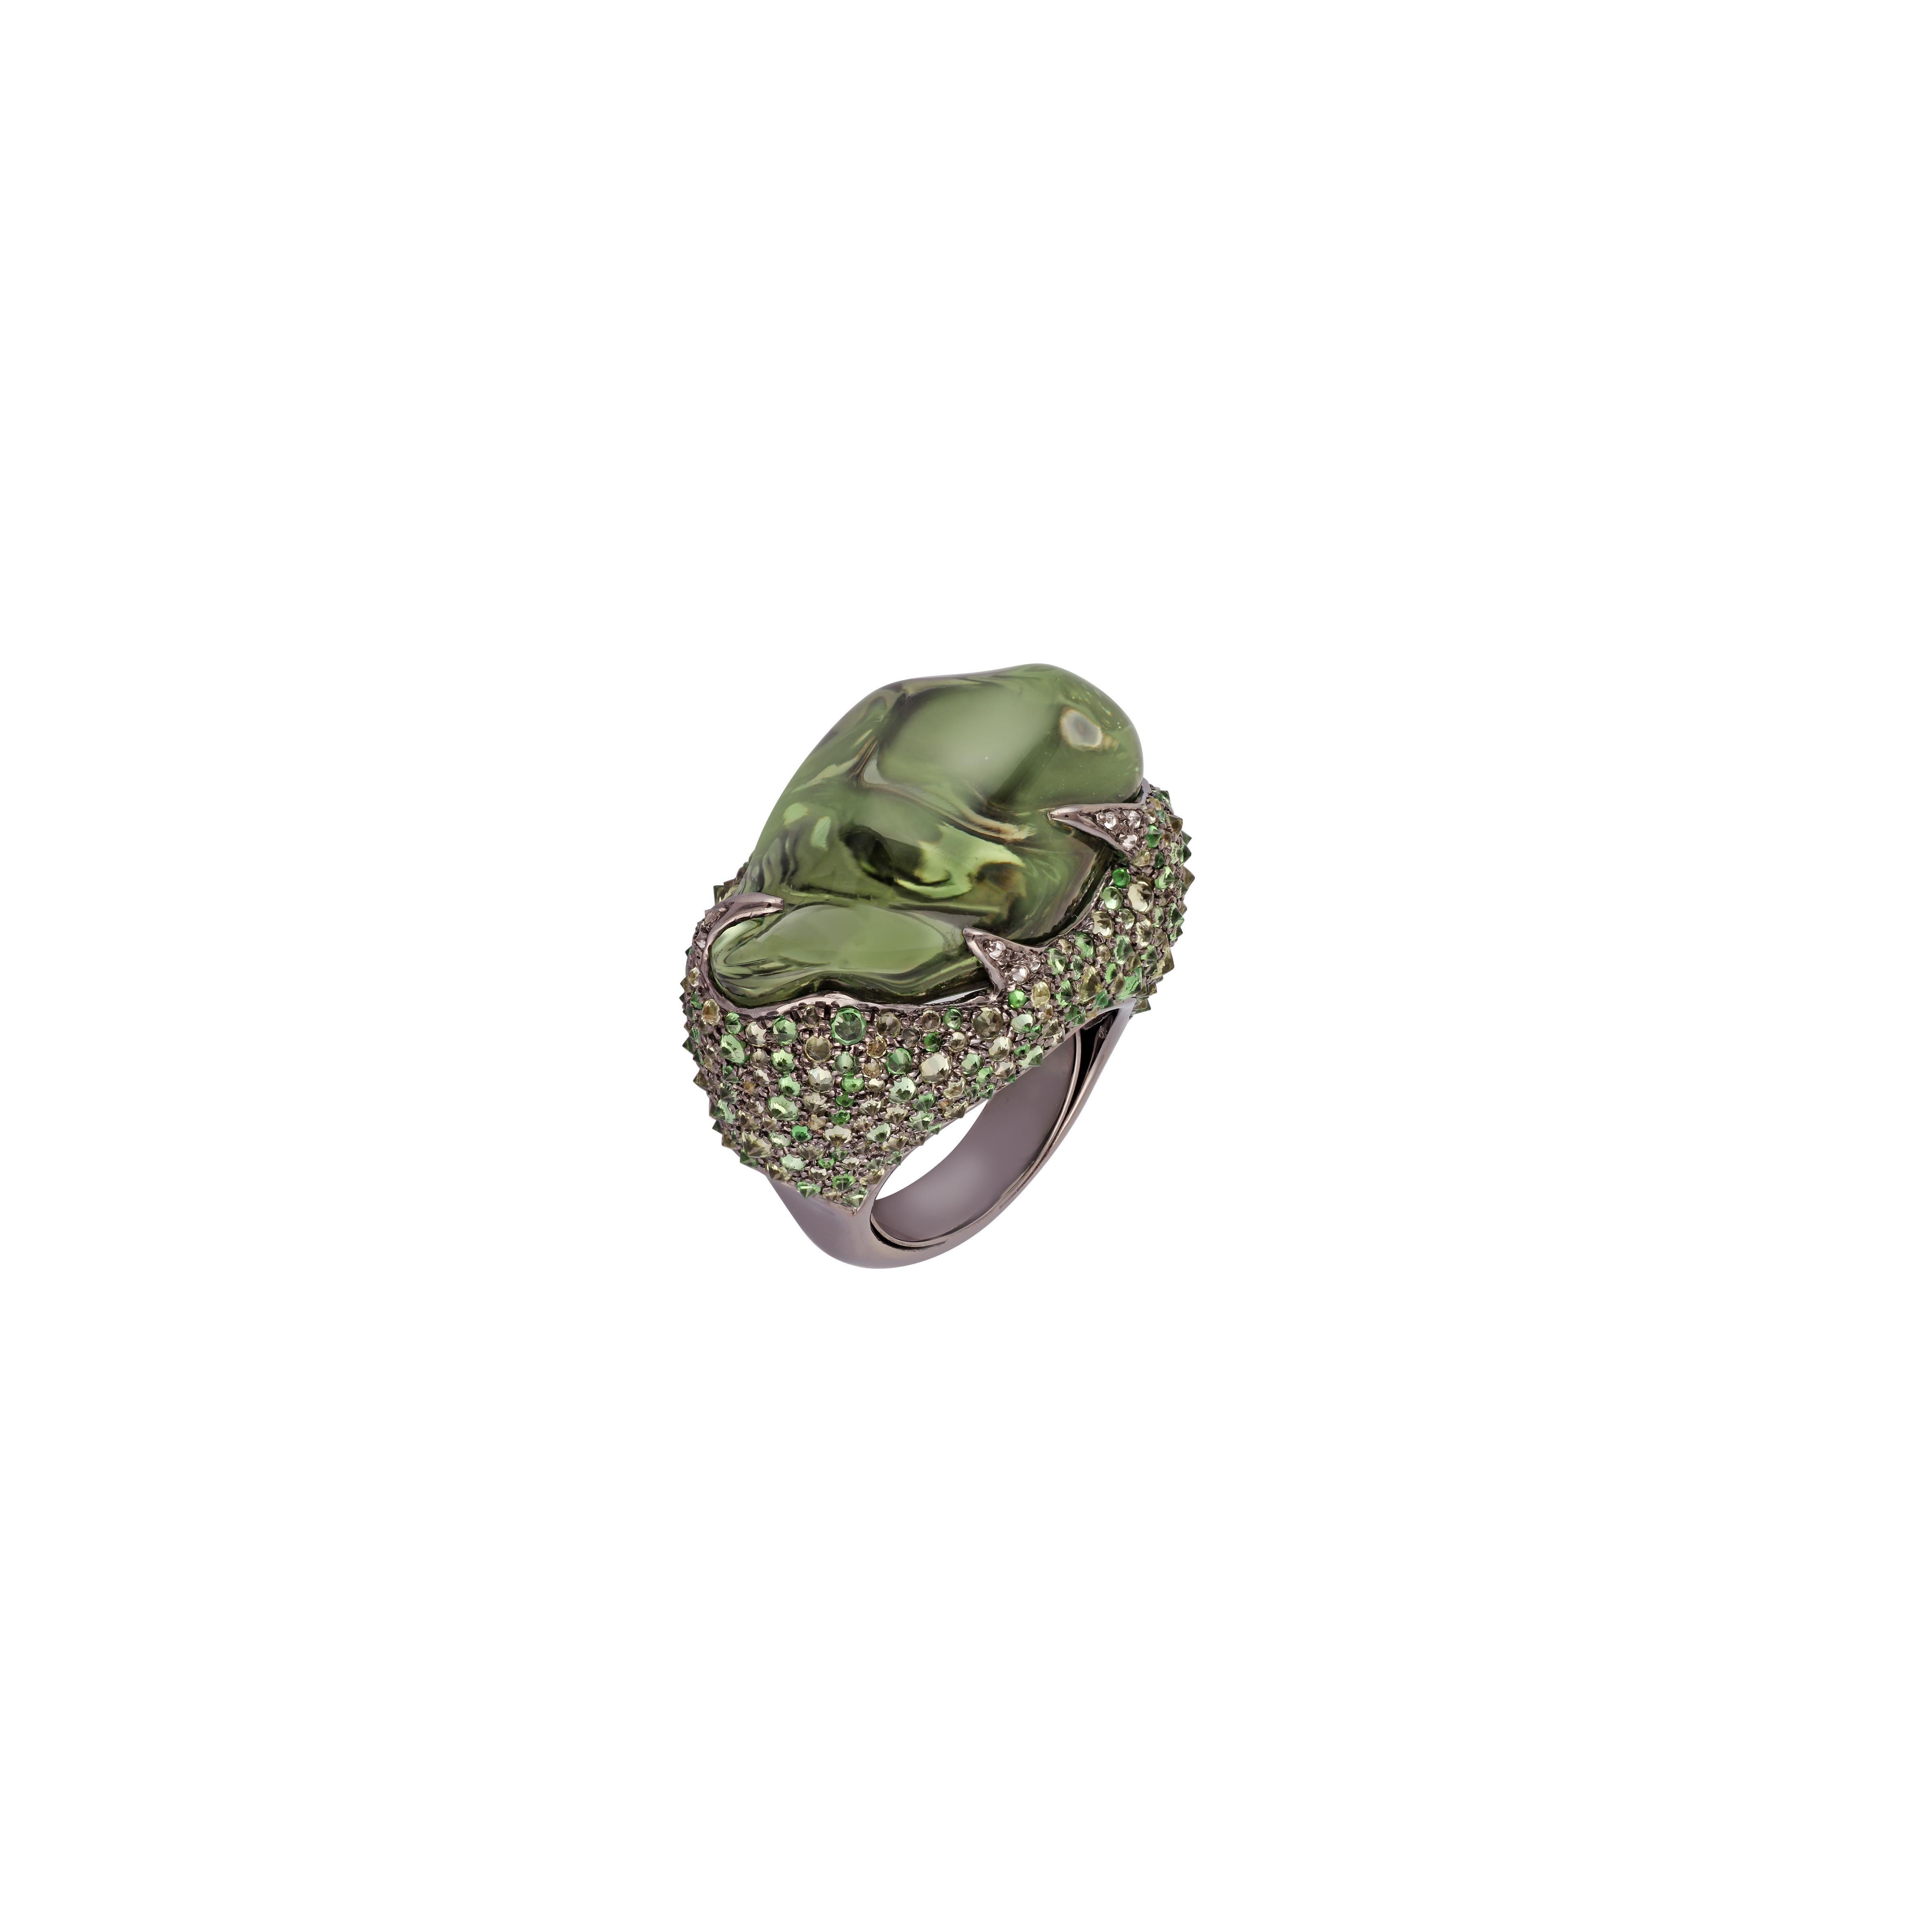 Tsavorite, Peridot, Green Amethyst, Diamond Ring in 18k Gold & Silver In New Condition For Sale In Jaipur, Rajasthan